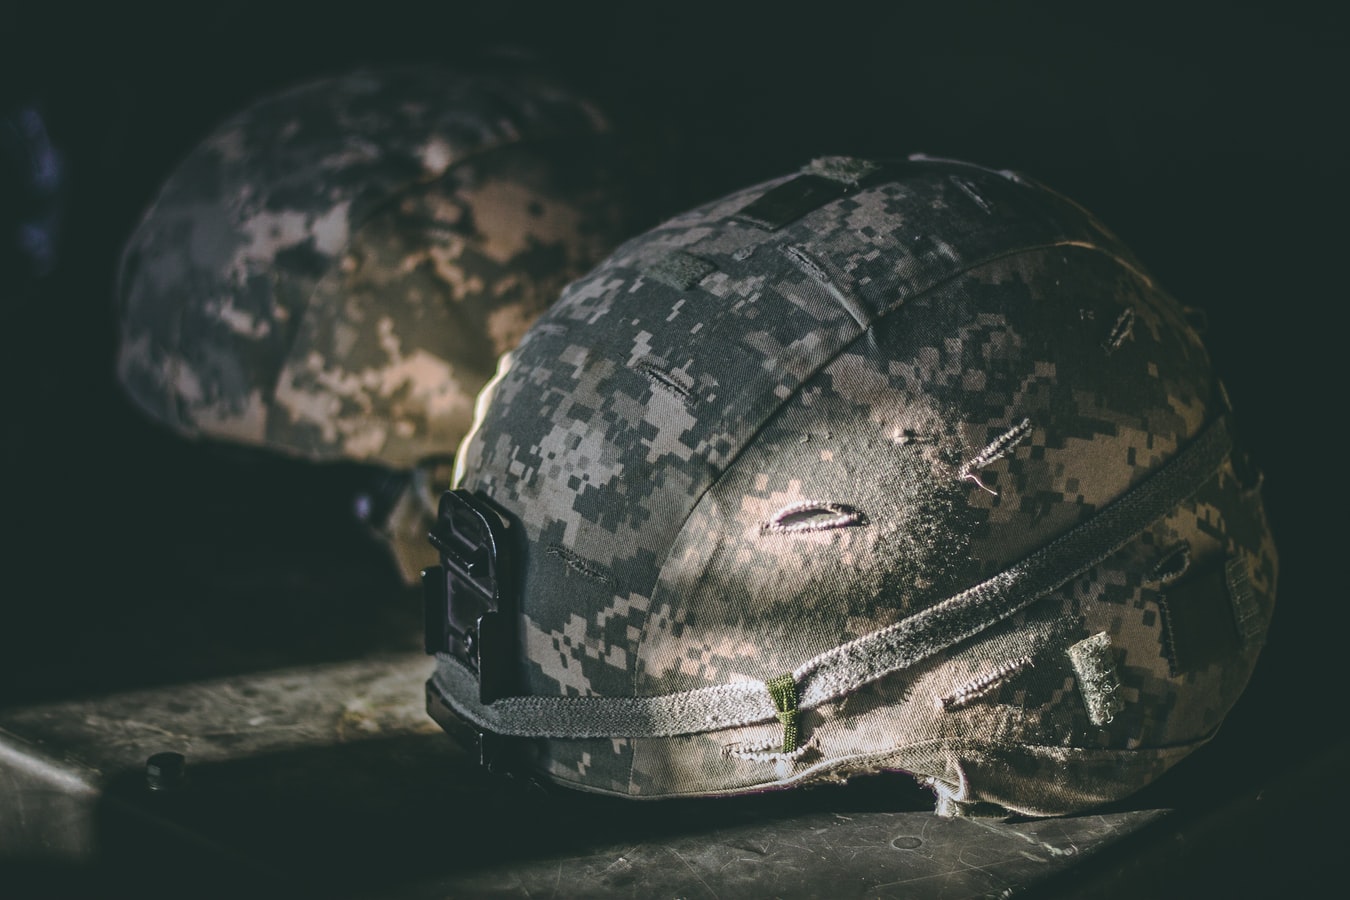 Helmets used by members of the U.S. military. Some veterans struggle with a dual diagnosis that includes substance abuse